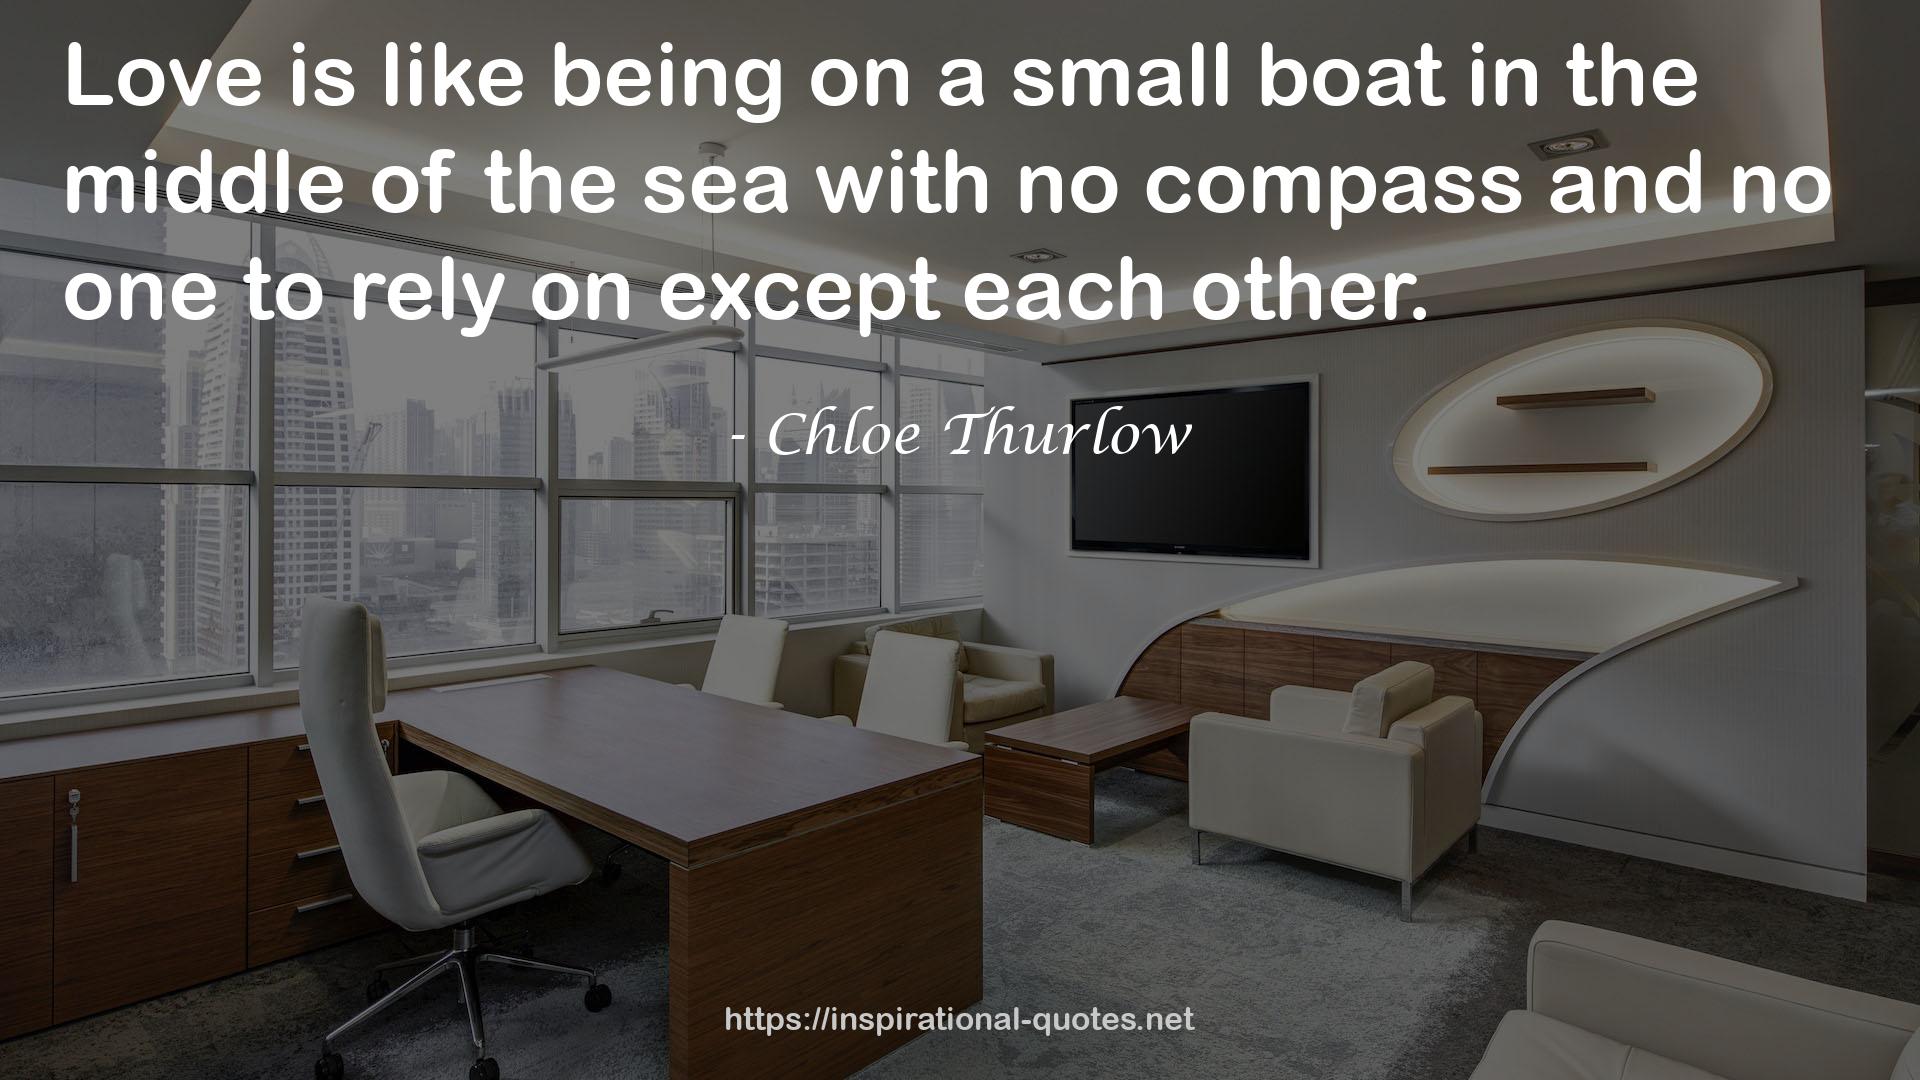 Chloe Thurlow QUOTES